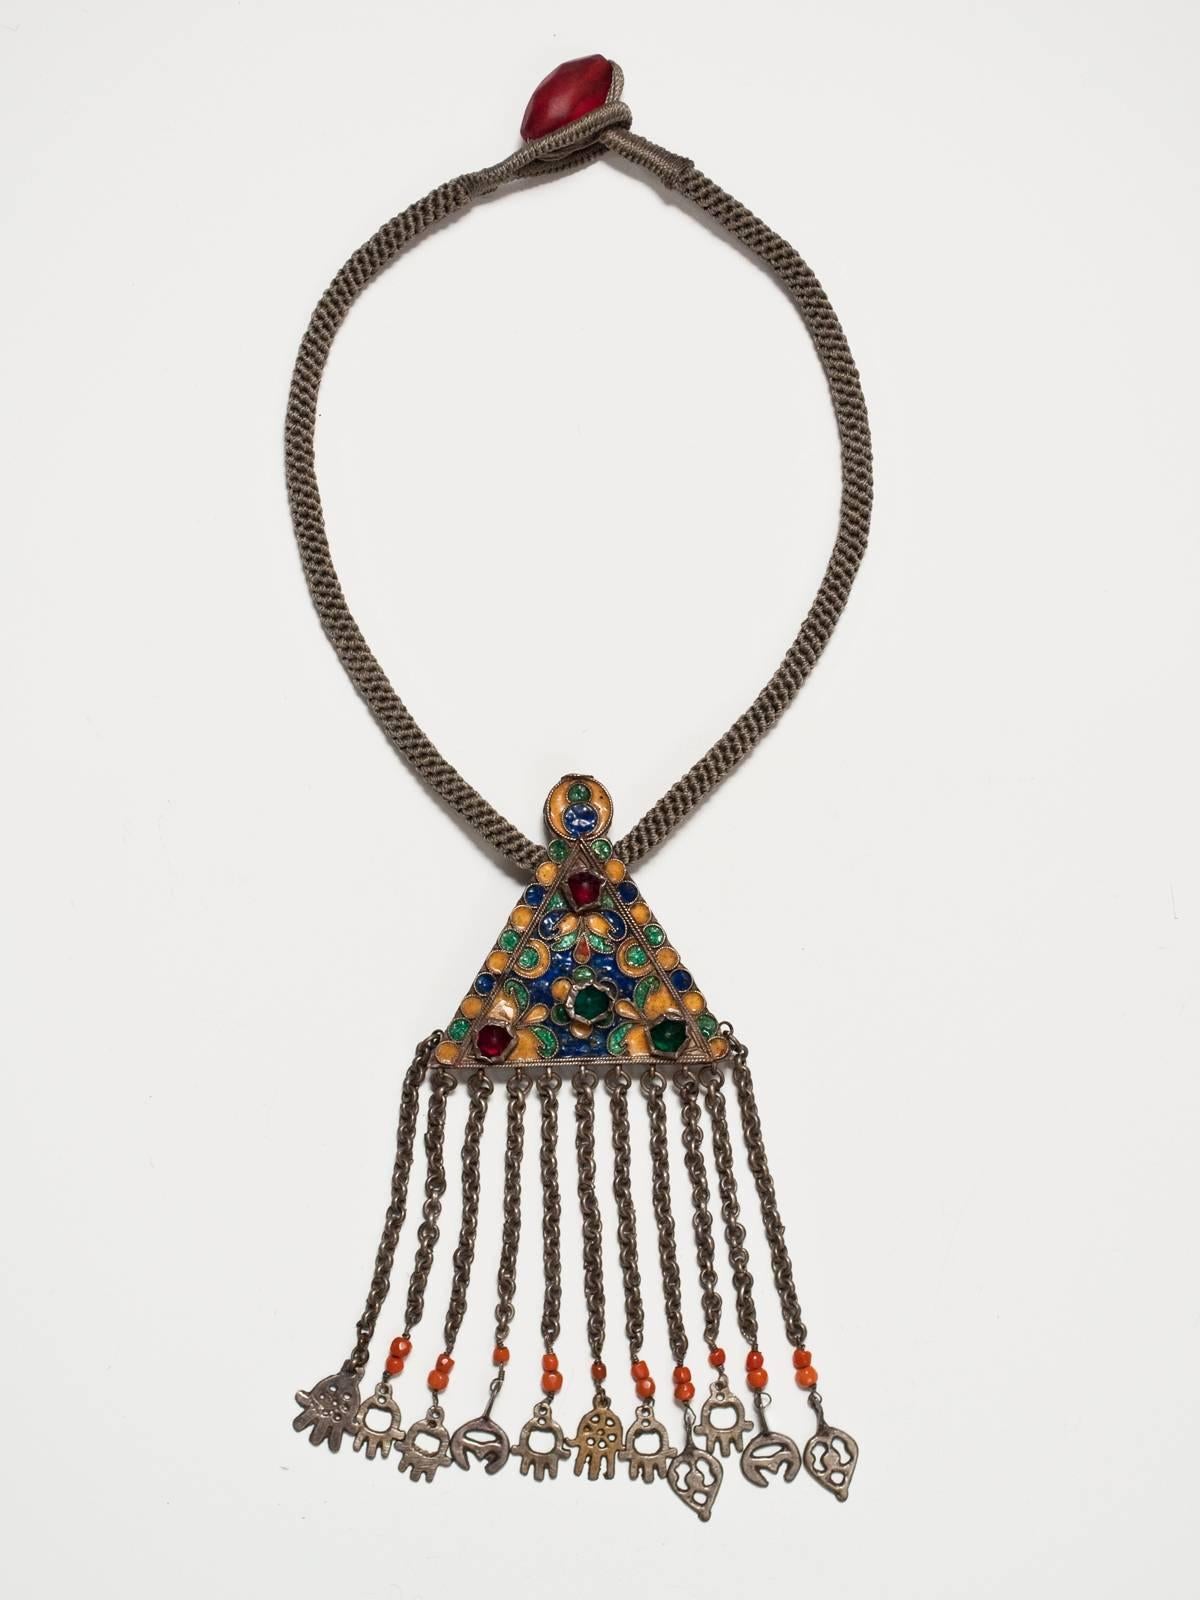 Early 20th century enamel and silver necklace, Djerba Island, Tunisia.

This is a very rare type of enamel and silver pendant from Djerba Island, Tunisia; I've only seen one other example in my many trips to this country. It is called a 'cotbat'